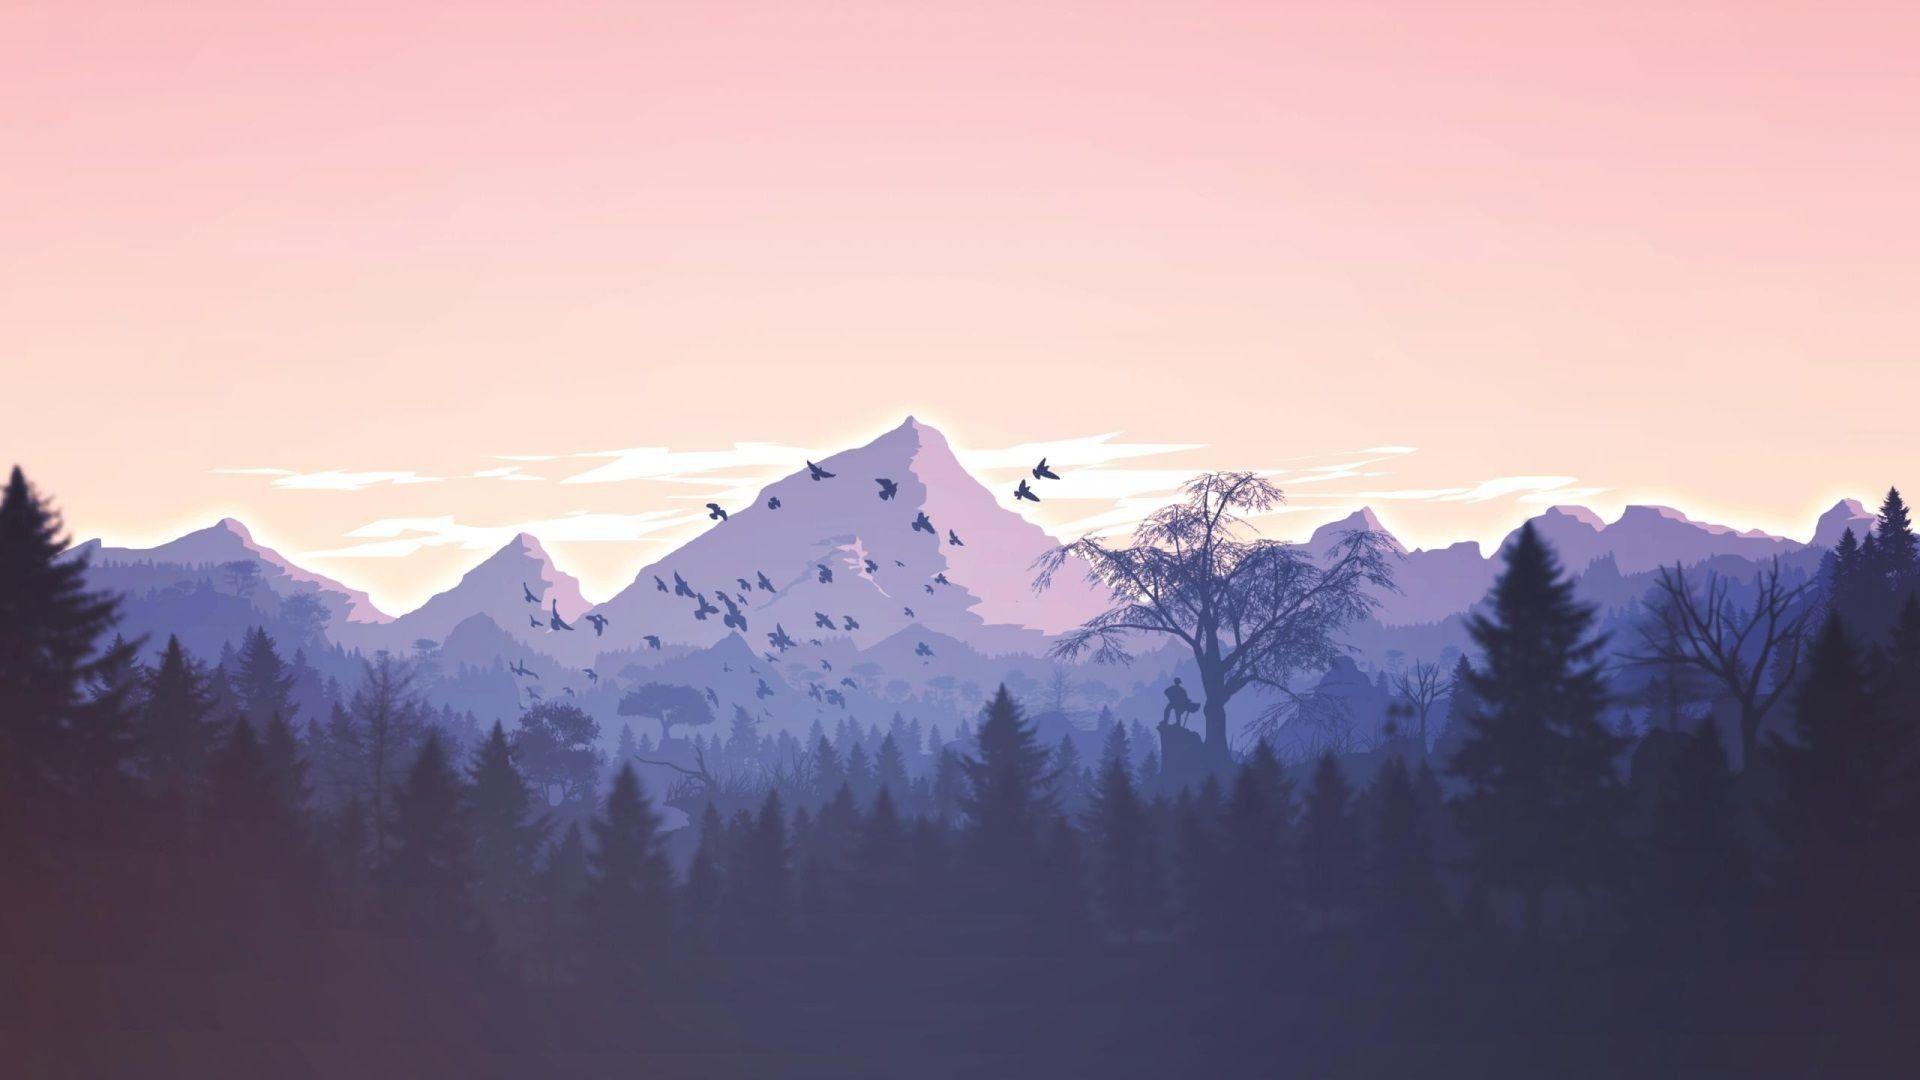 Pastel Aesthetic Mountain Wallpapers Top Free Pastel Aesthetic Mountain Backgrounds Wallpaperaccess